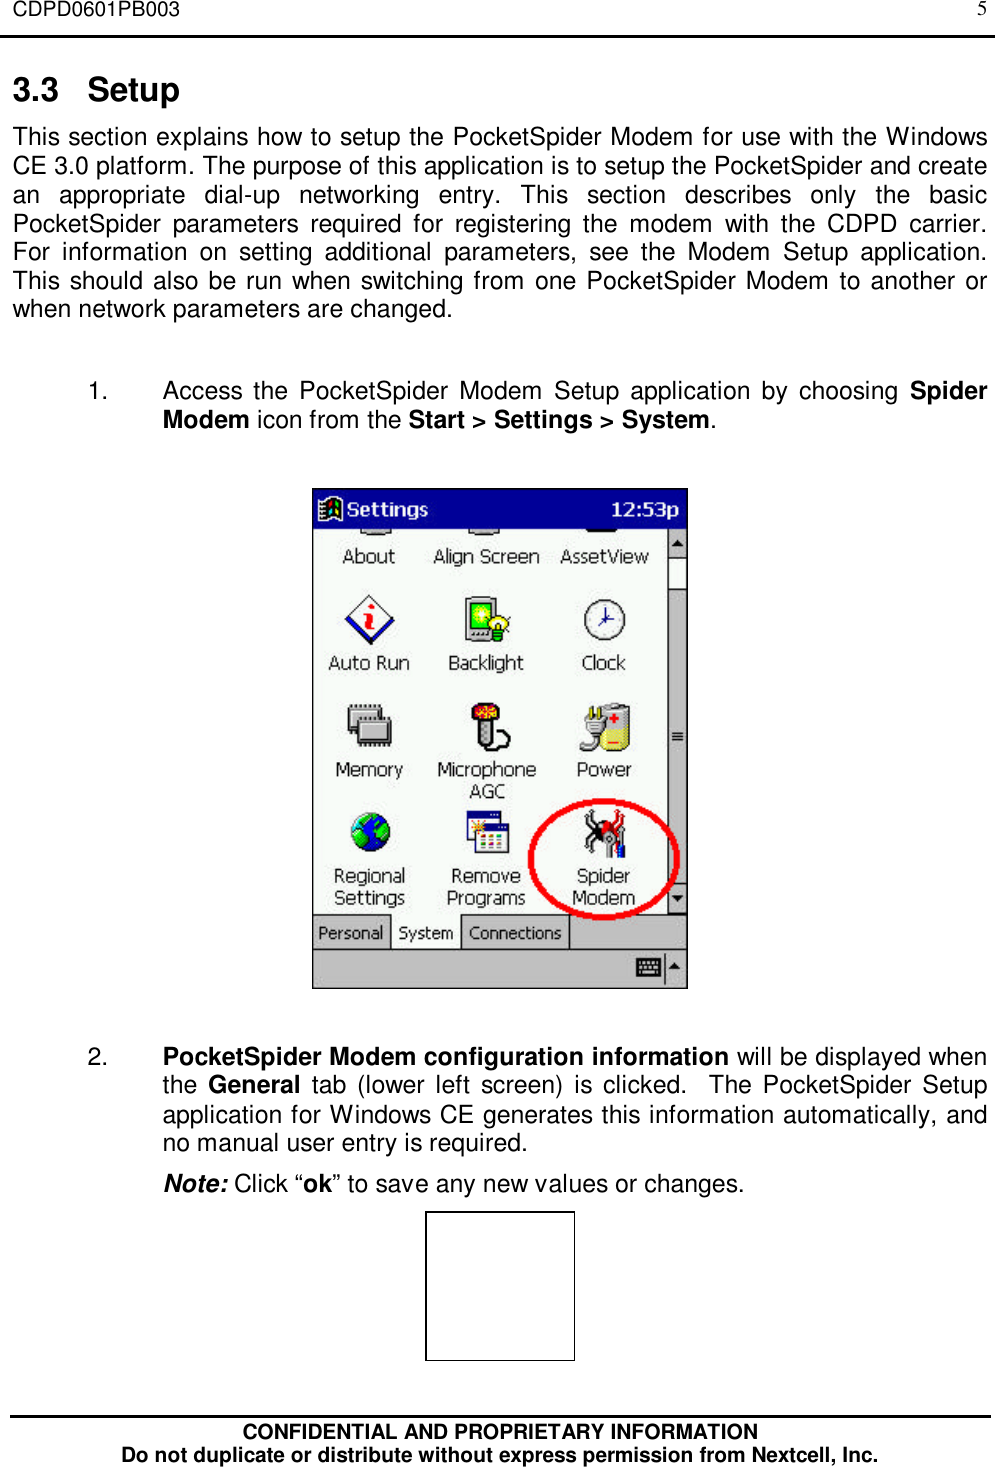 CDPD0601PB003CONFIDENTIAL AND PROPRIETARY INFORMATIONDo not duplicate or distribute without express permission from Nextcell, Inc.53.3 SetupThis section explains how to setup the PocketSpider Modem for use with the WindowsCE 3.0 platform. The purpose of this application is to setup the PocketSpider and createan appropriate dial-up networking entry. This section describes only the basicPocketSpider parameters required for registering the modem with the CDPD carrier.For information on setting additional parameters, see the Modem Setup application.This should also be run when switching from one PocketSpider Modem to another orwhen network parameters are changed.1. Access the PocketSpider Modem Setup application by choosing SpiderModem icon from the Start &gt; Settings &gt; System.2. PocketSpider Modem configuration information will be displayed whenthe General tab (lower left screen) is clicked.  The PocketSpider Setupapplication for Windows CE generates this information automatically, andno manual user entry is required.Note: Click “ok” to save any new values or changes.